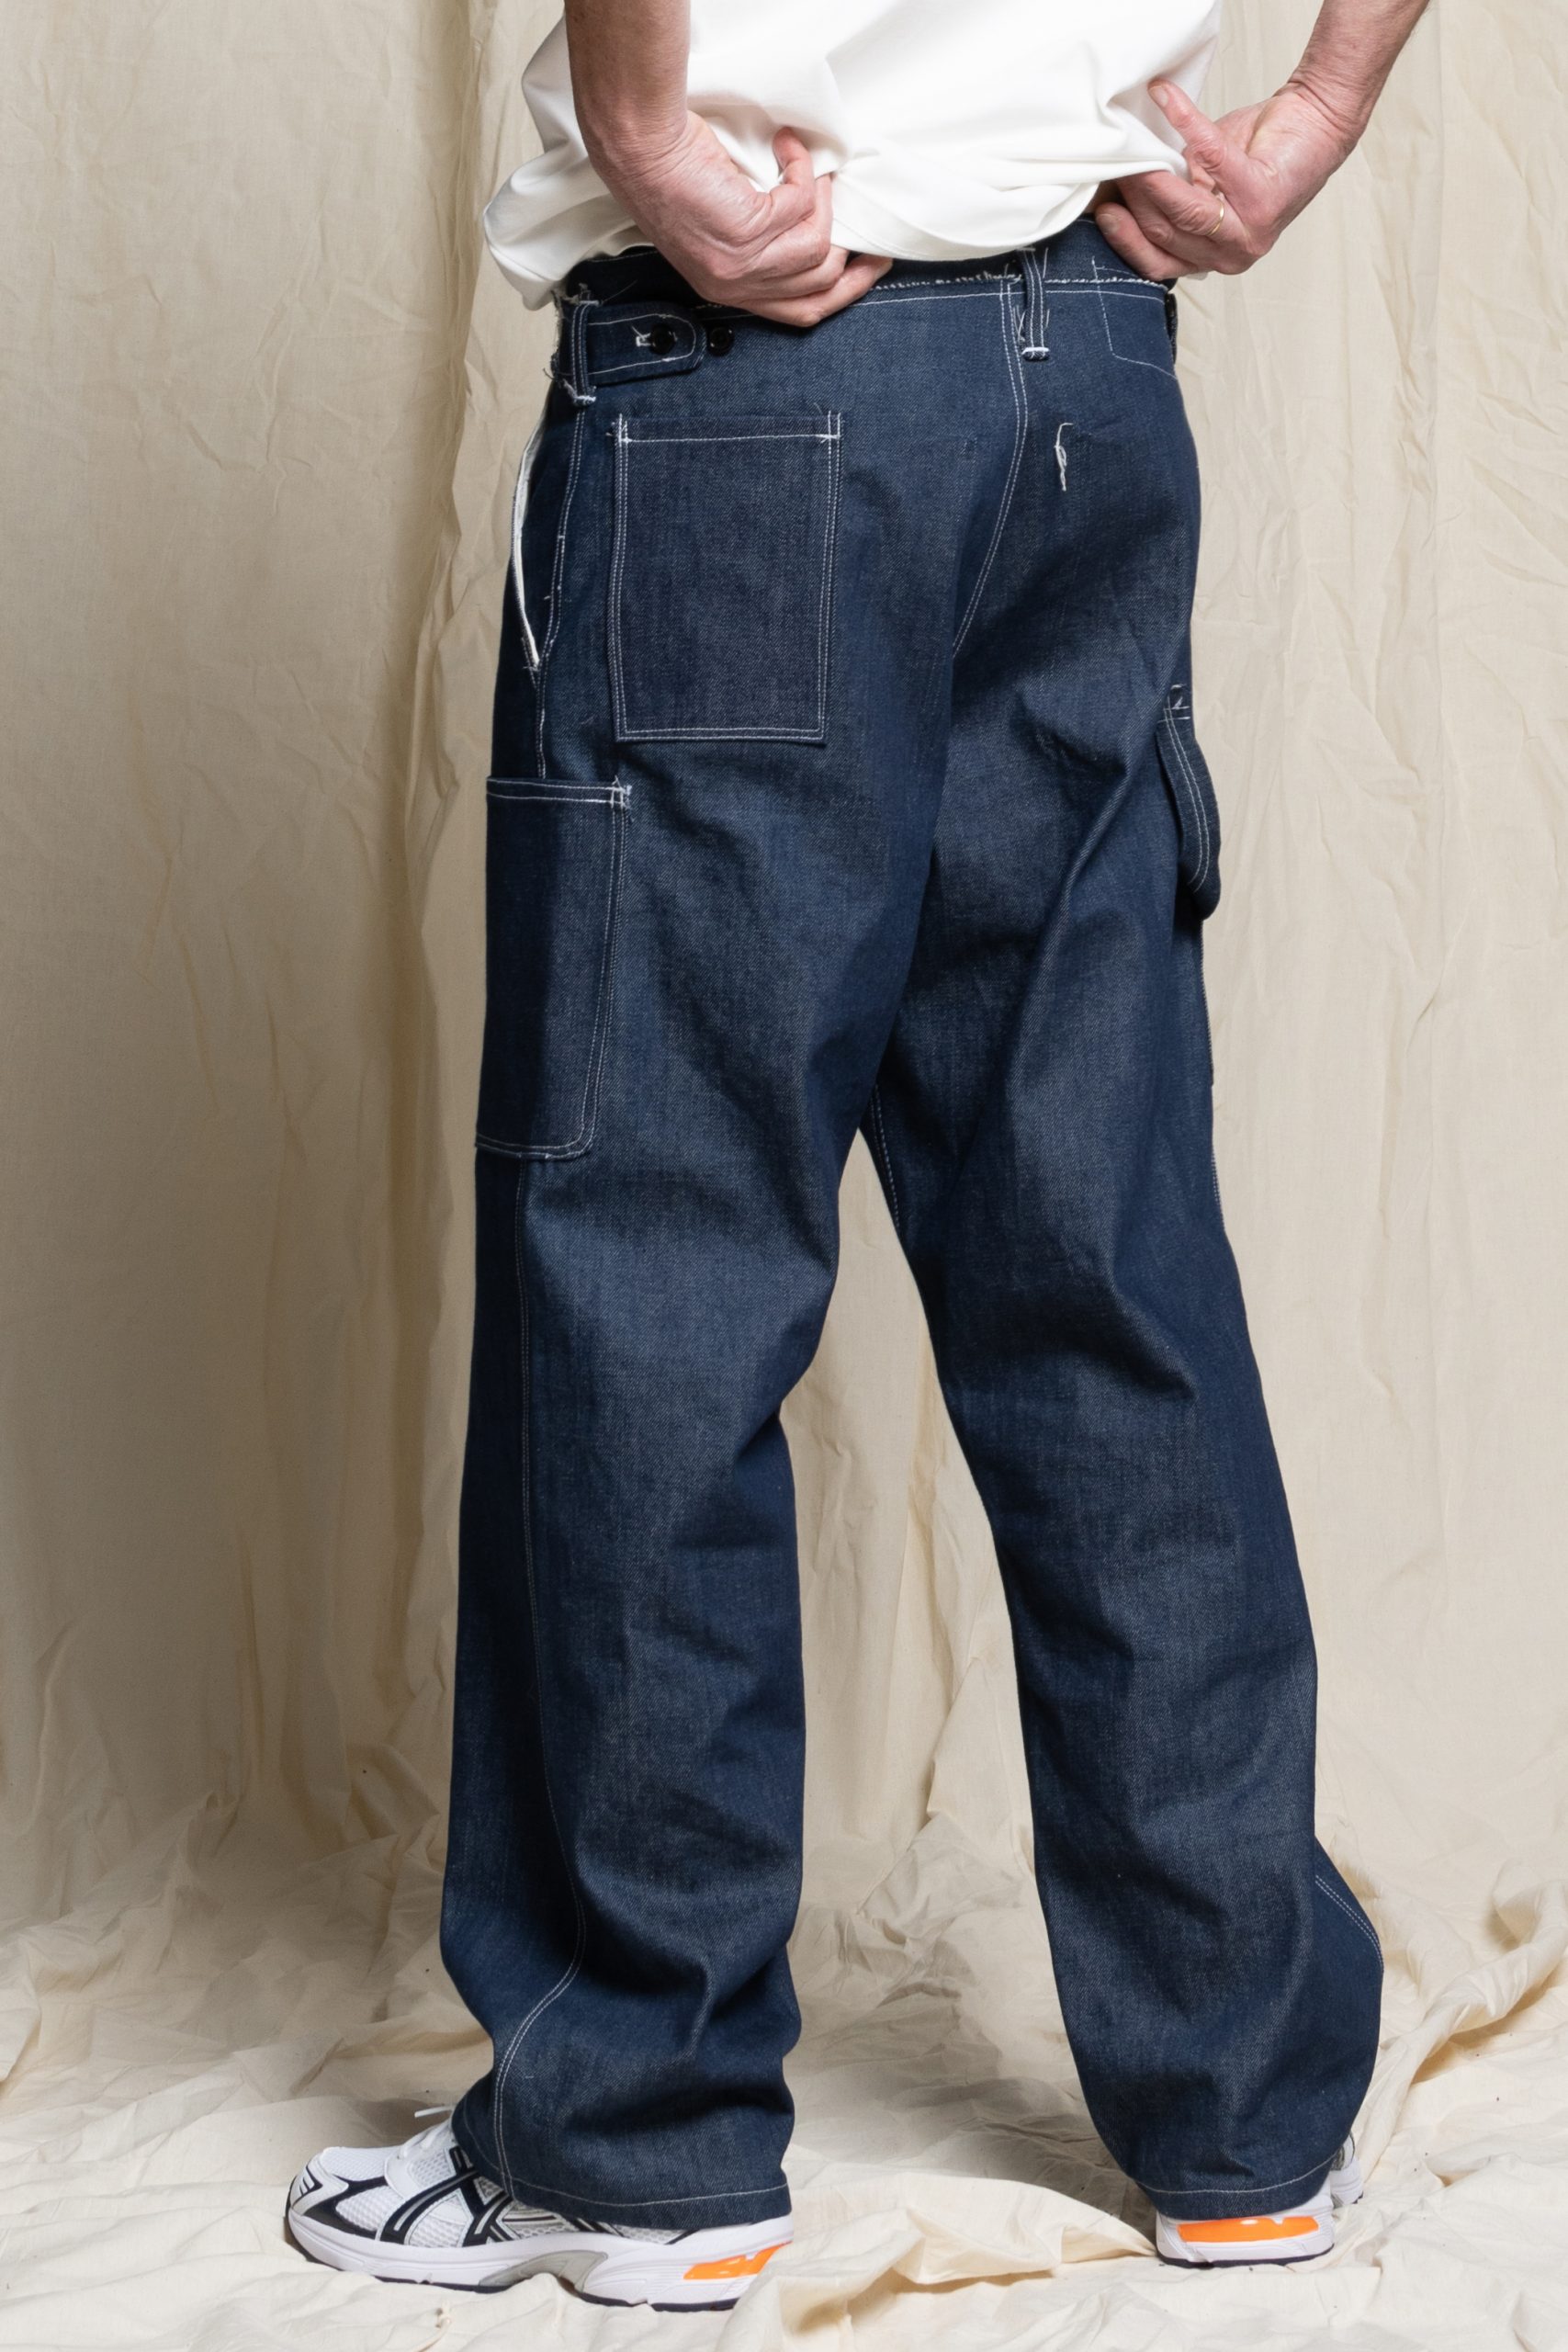 camiel fortgens research worker pants-